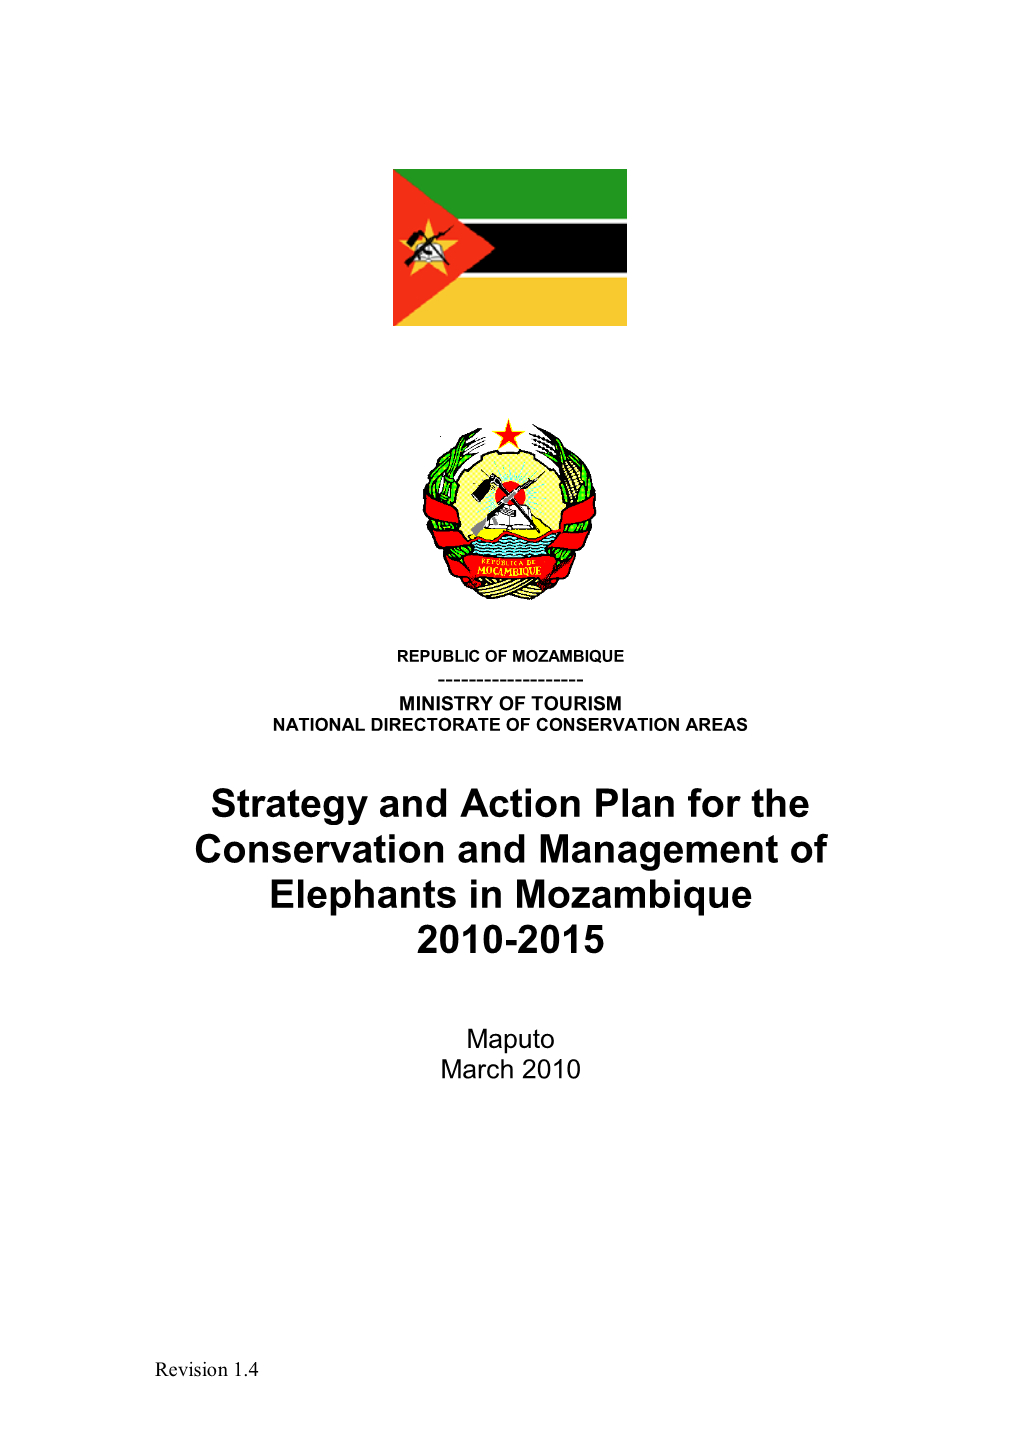 Strategy and Action Plan for the Conservation and Management of Elephants in Mozambique 2010-2015